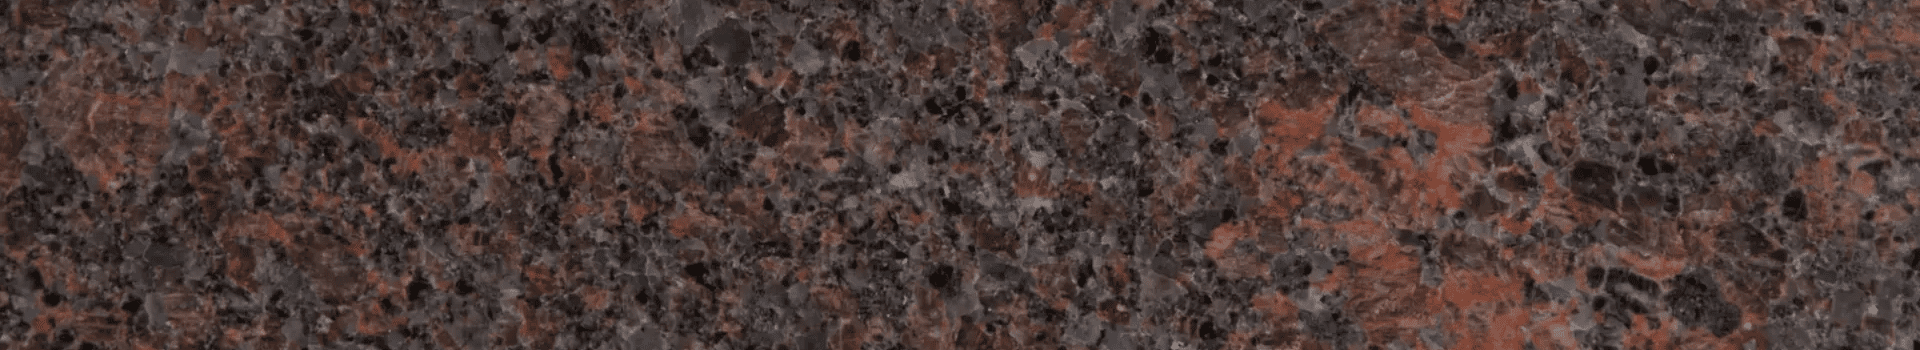 A brown and black marble background with some small spots.